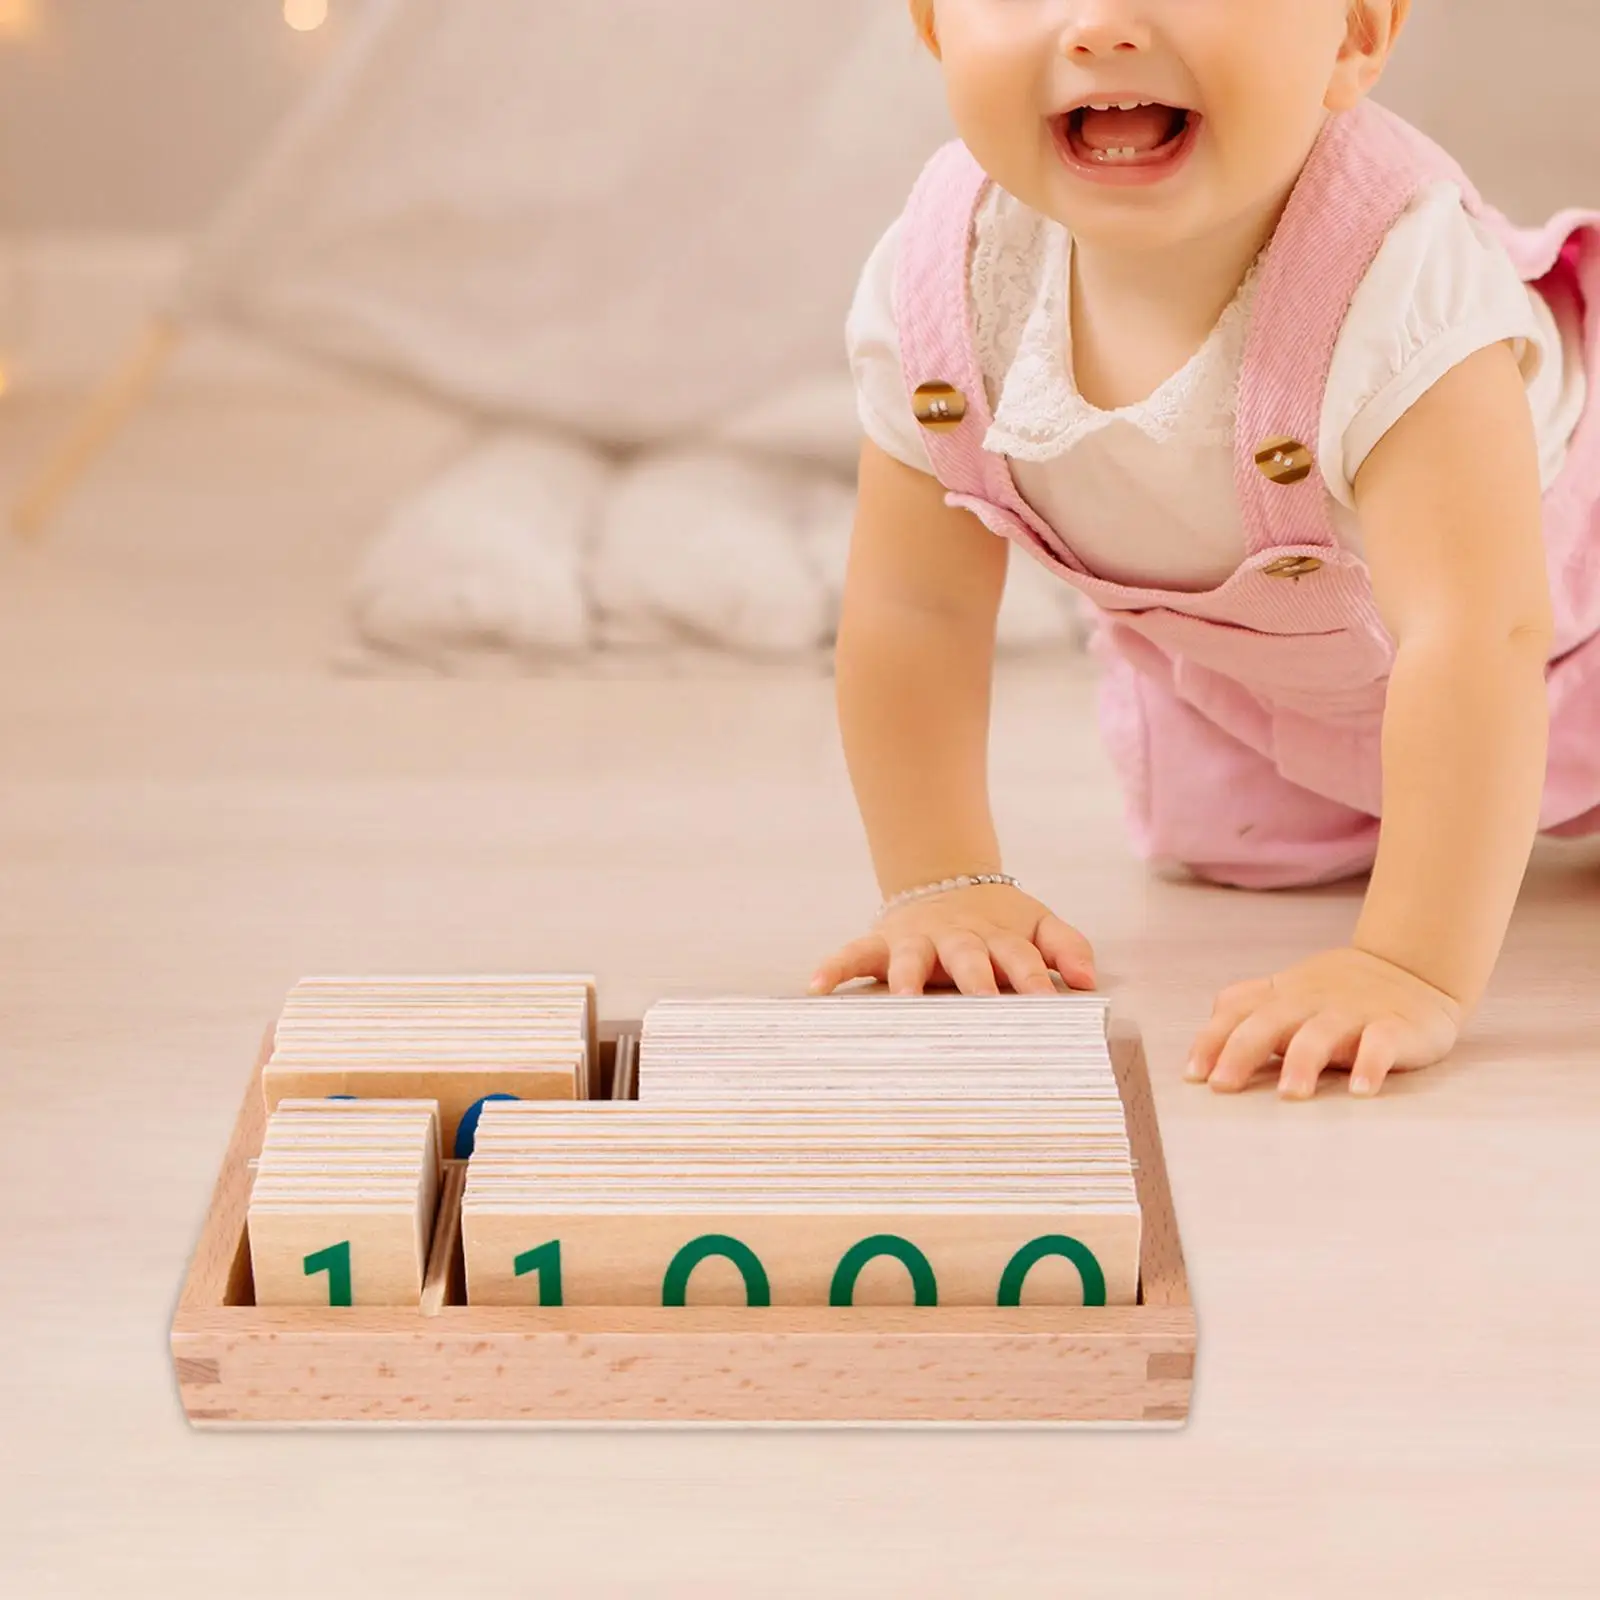 Wooden Number Cards with Box Wooden Boy Girls Early Learning Toy (1-9000) Basic Math Game Birthday Montessori Small Number Cards